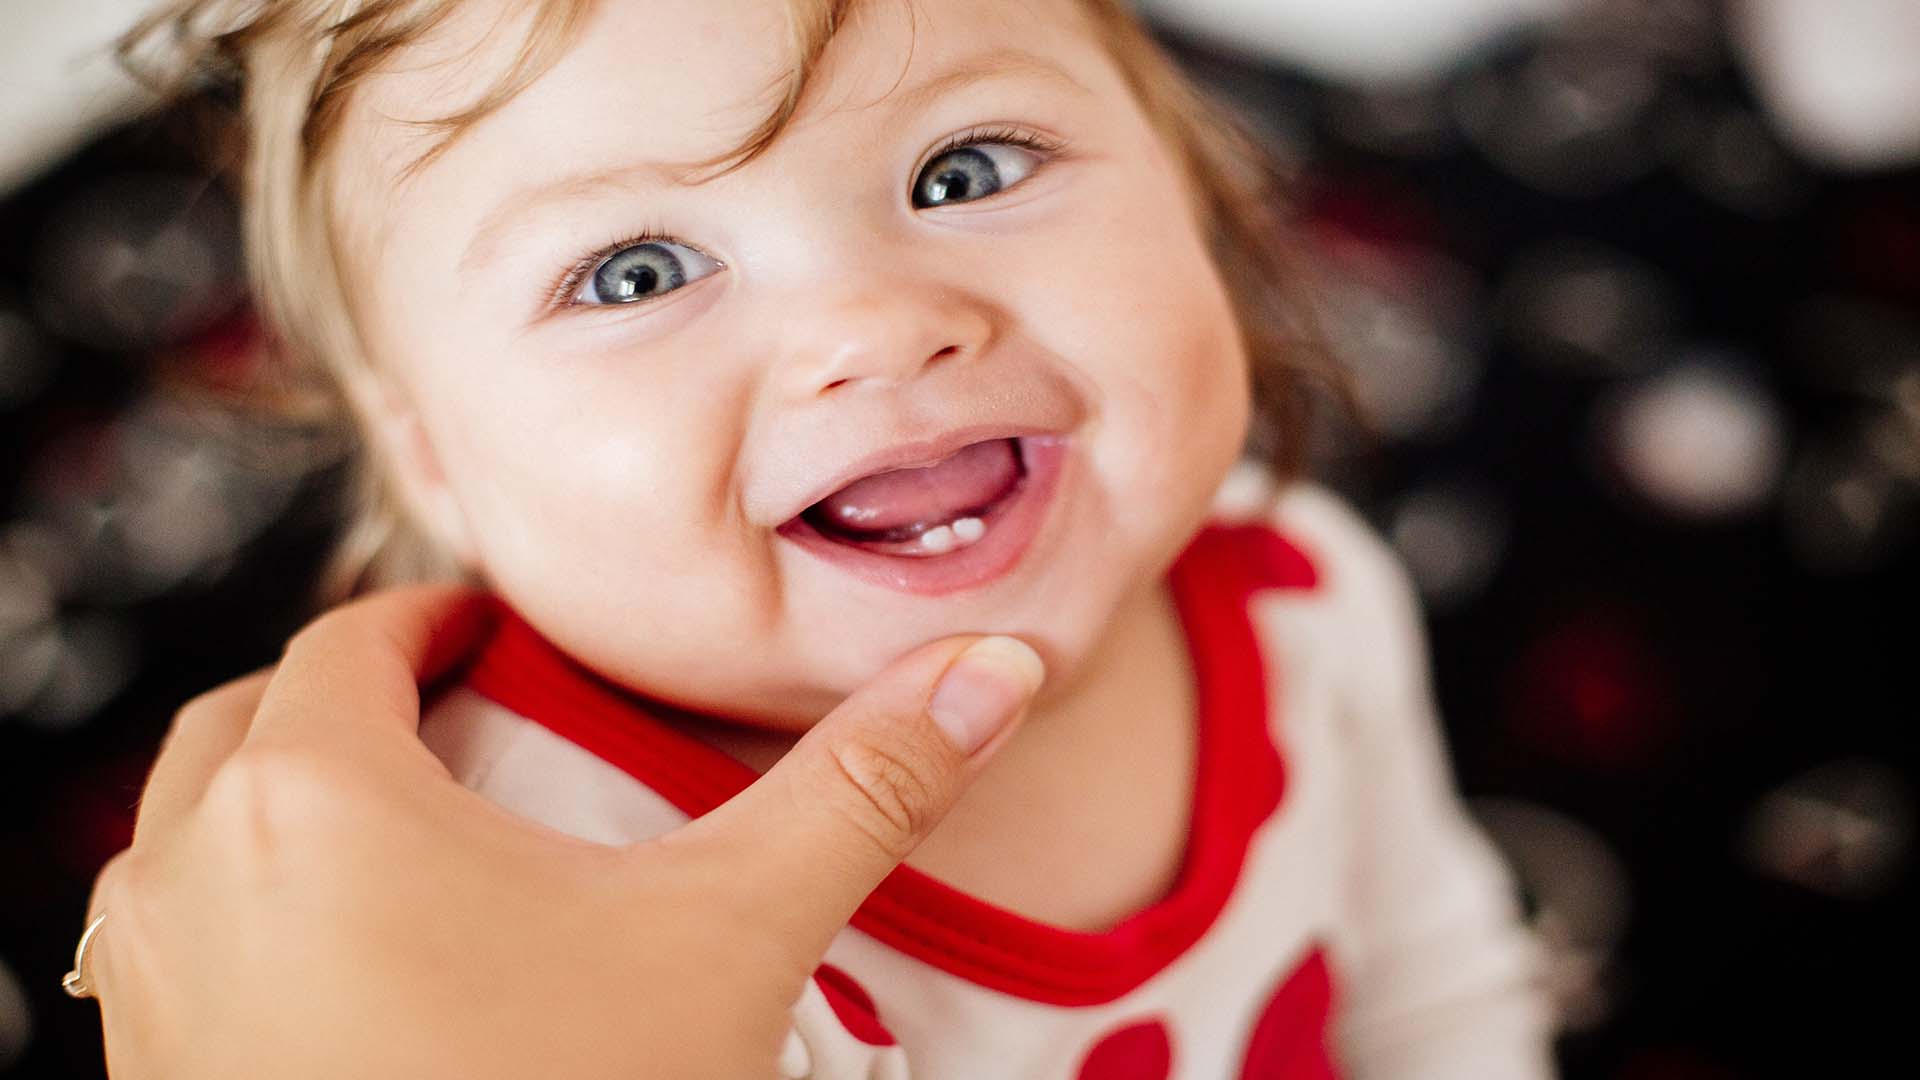 smiling baby with lower central incisors showing